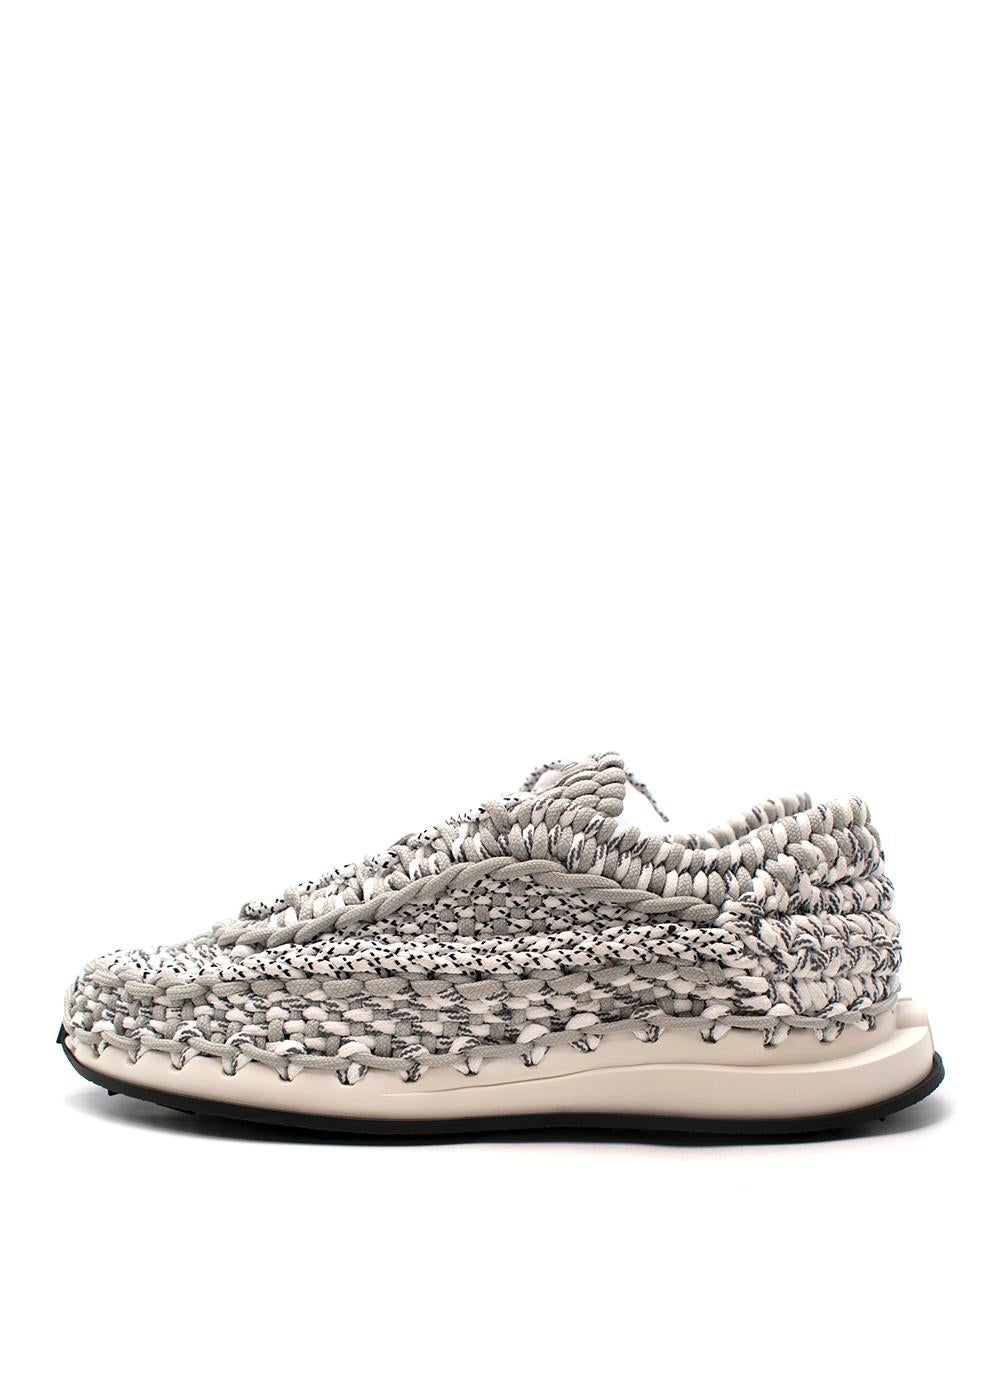 Grey Woven Cord Sneakers For Sale 1